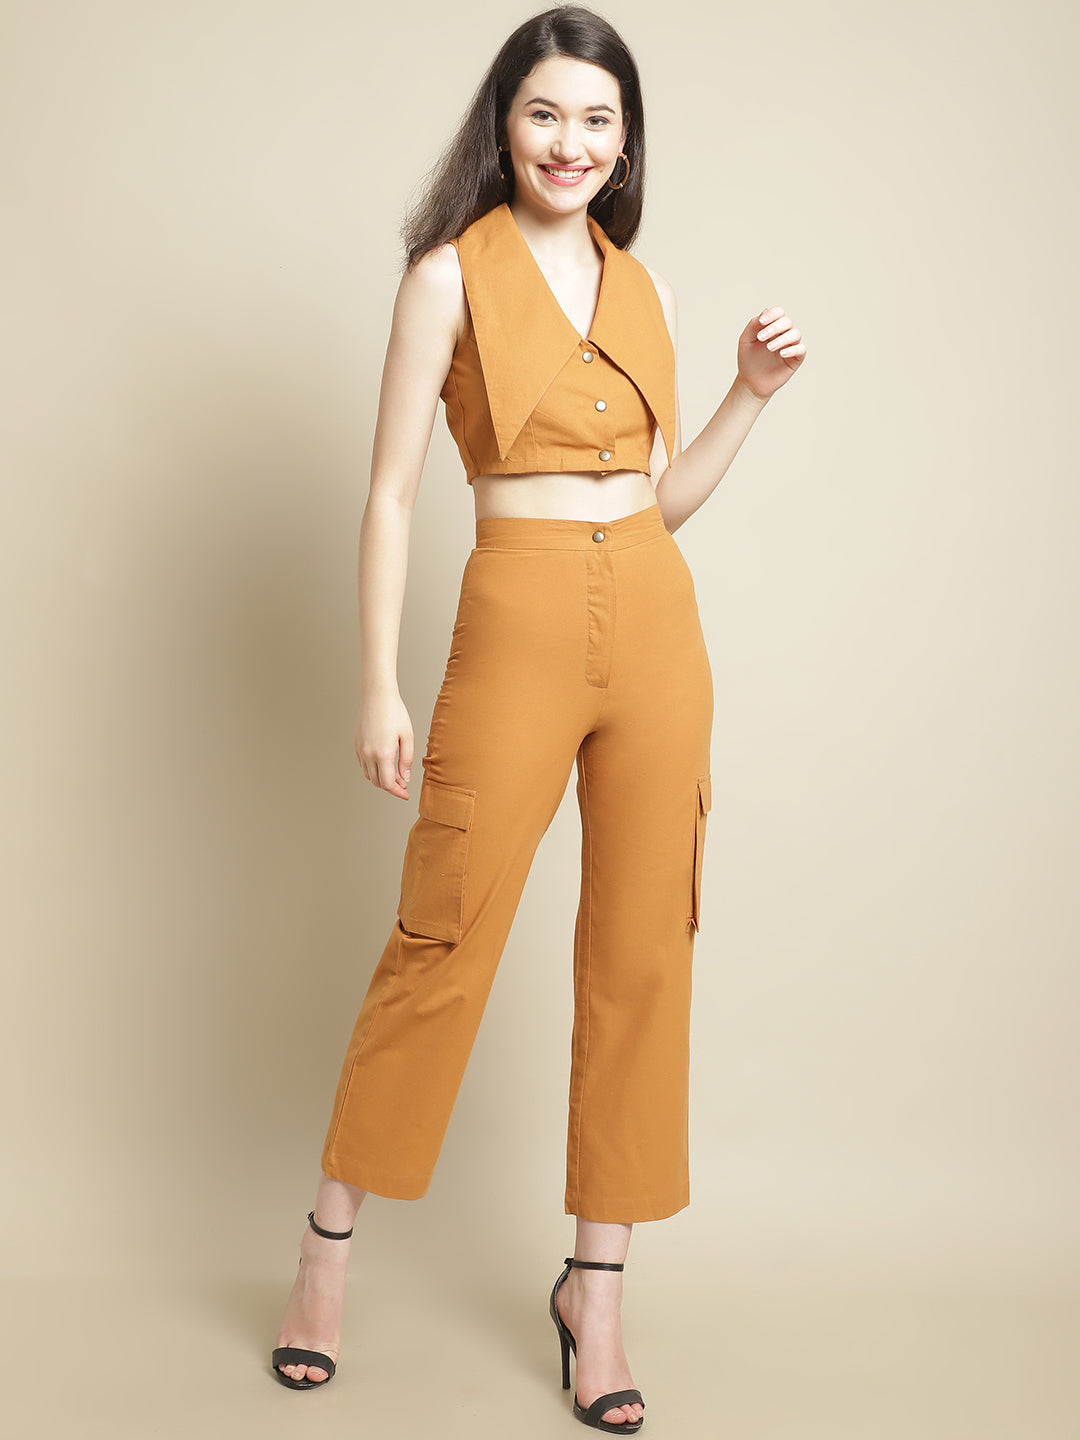 Blanc9 Mustard Crop Top With Pants-B9ST126